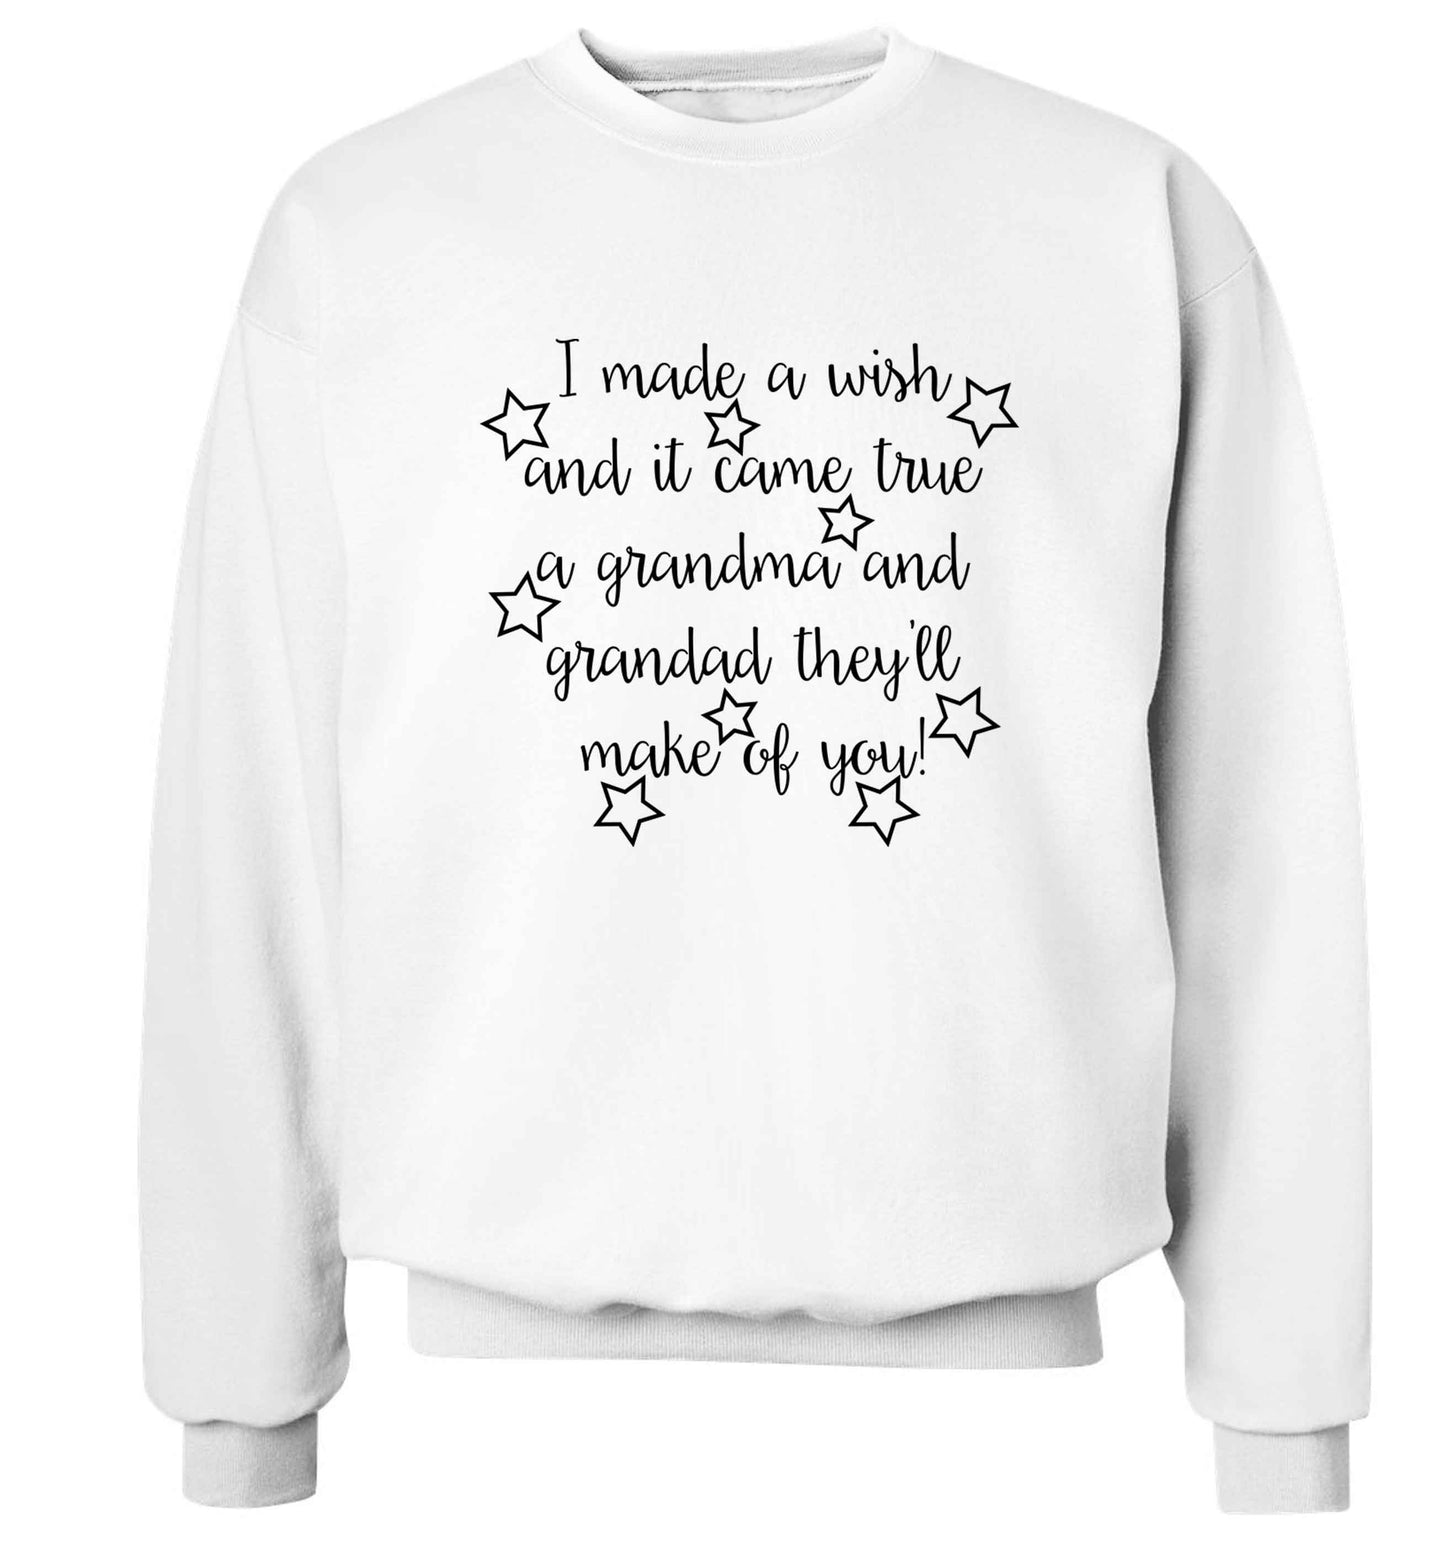 I made a wish and it came true a grandma and grandad they'll make of you! Adult's unisex white Sweater 2XL